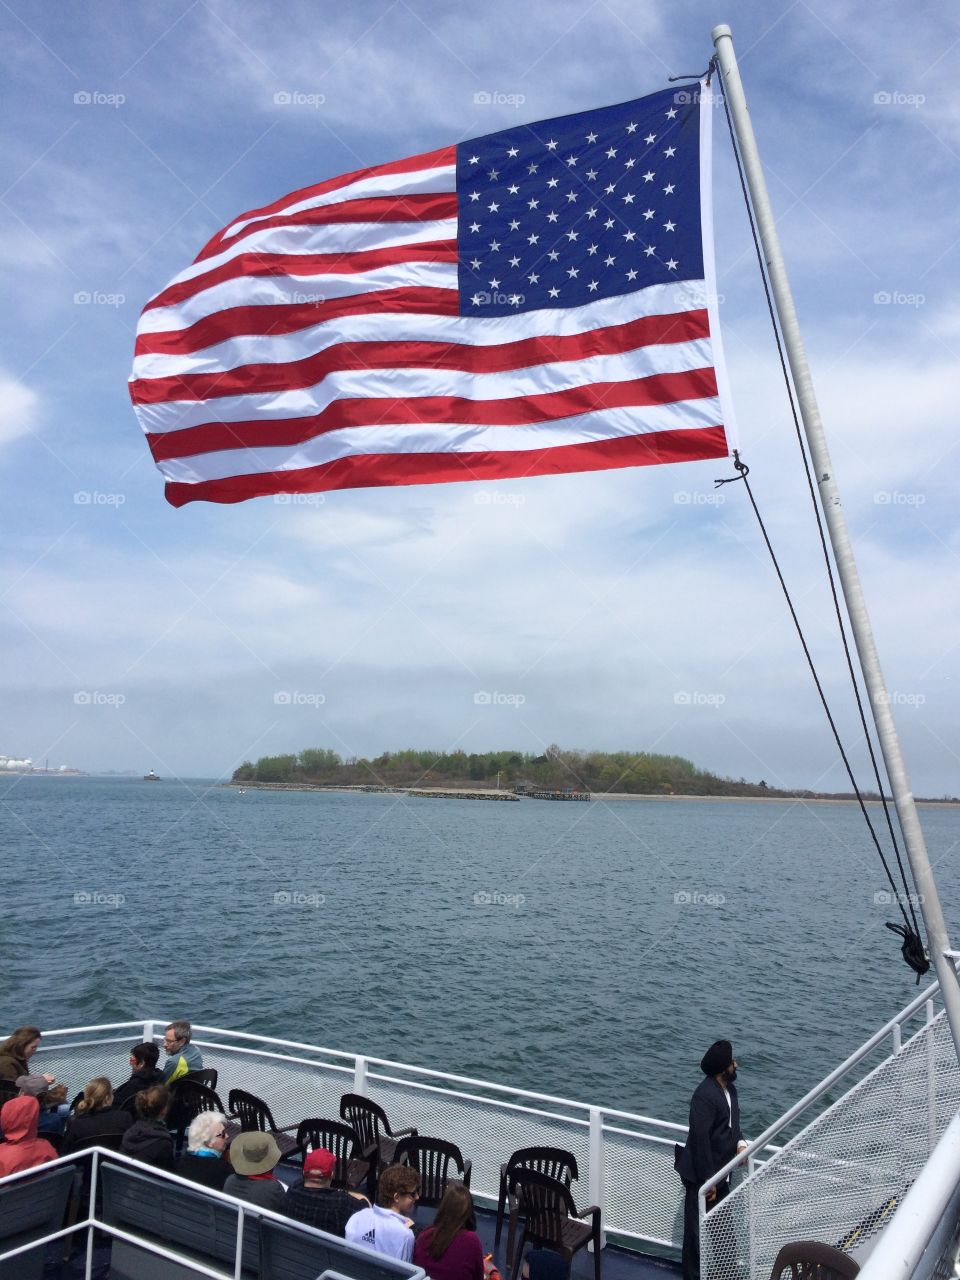 American flag on boat. Island in the background 